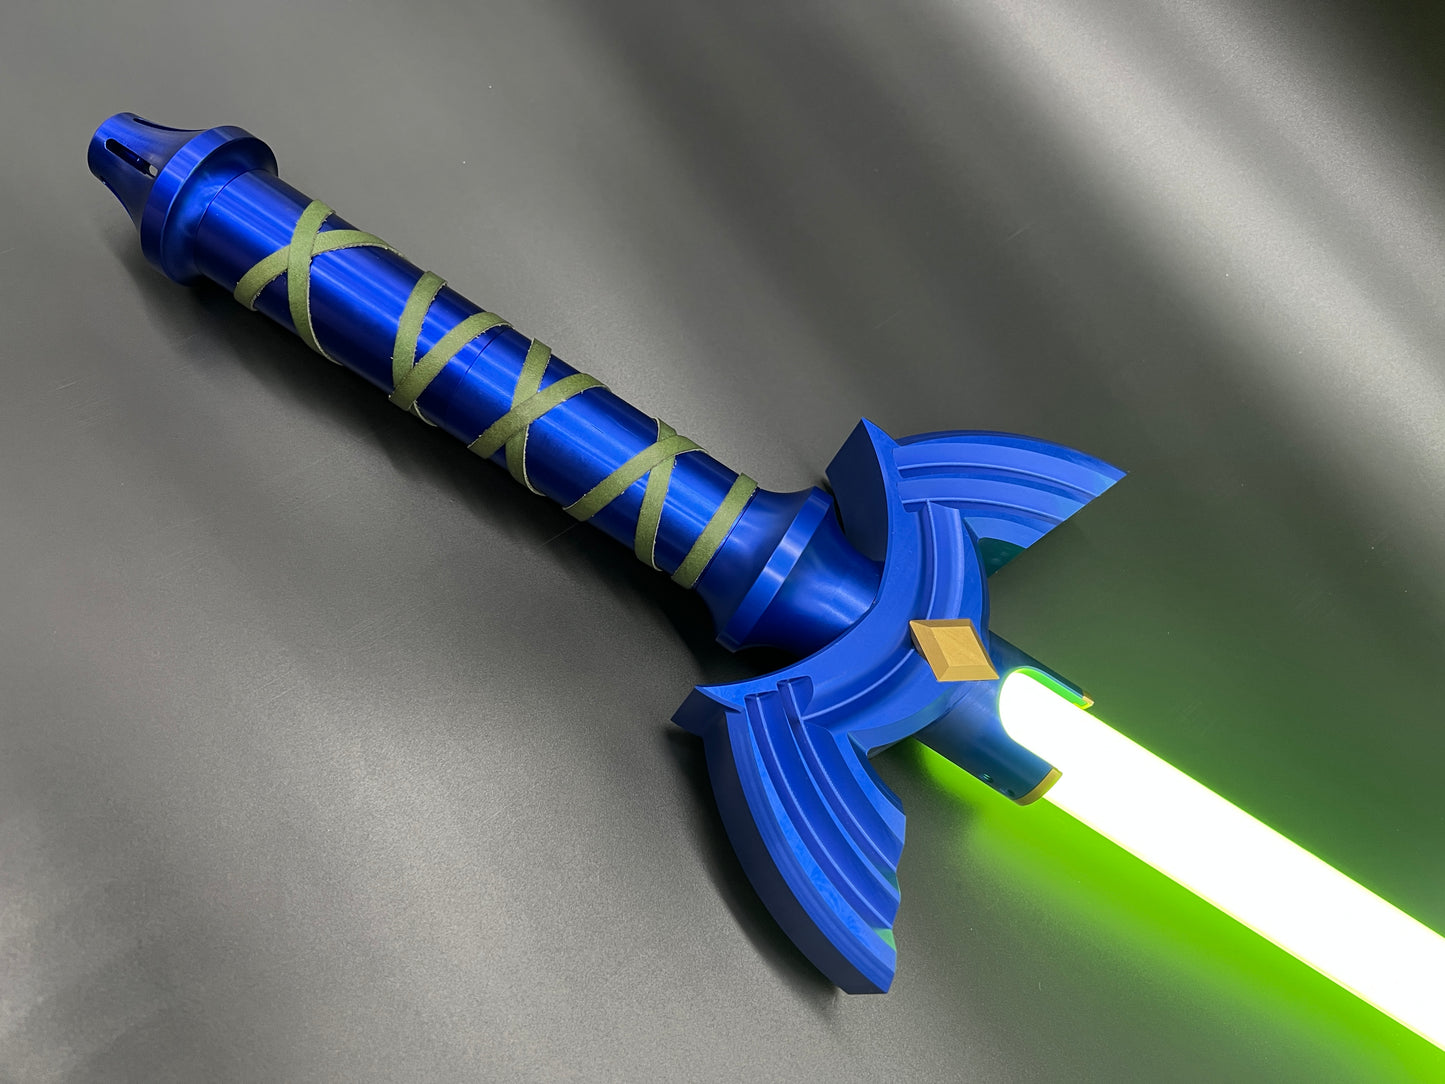 THE SWORD OF TIME LIGHTSABER